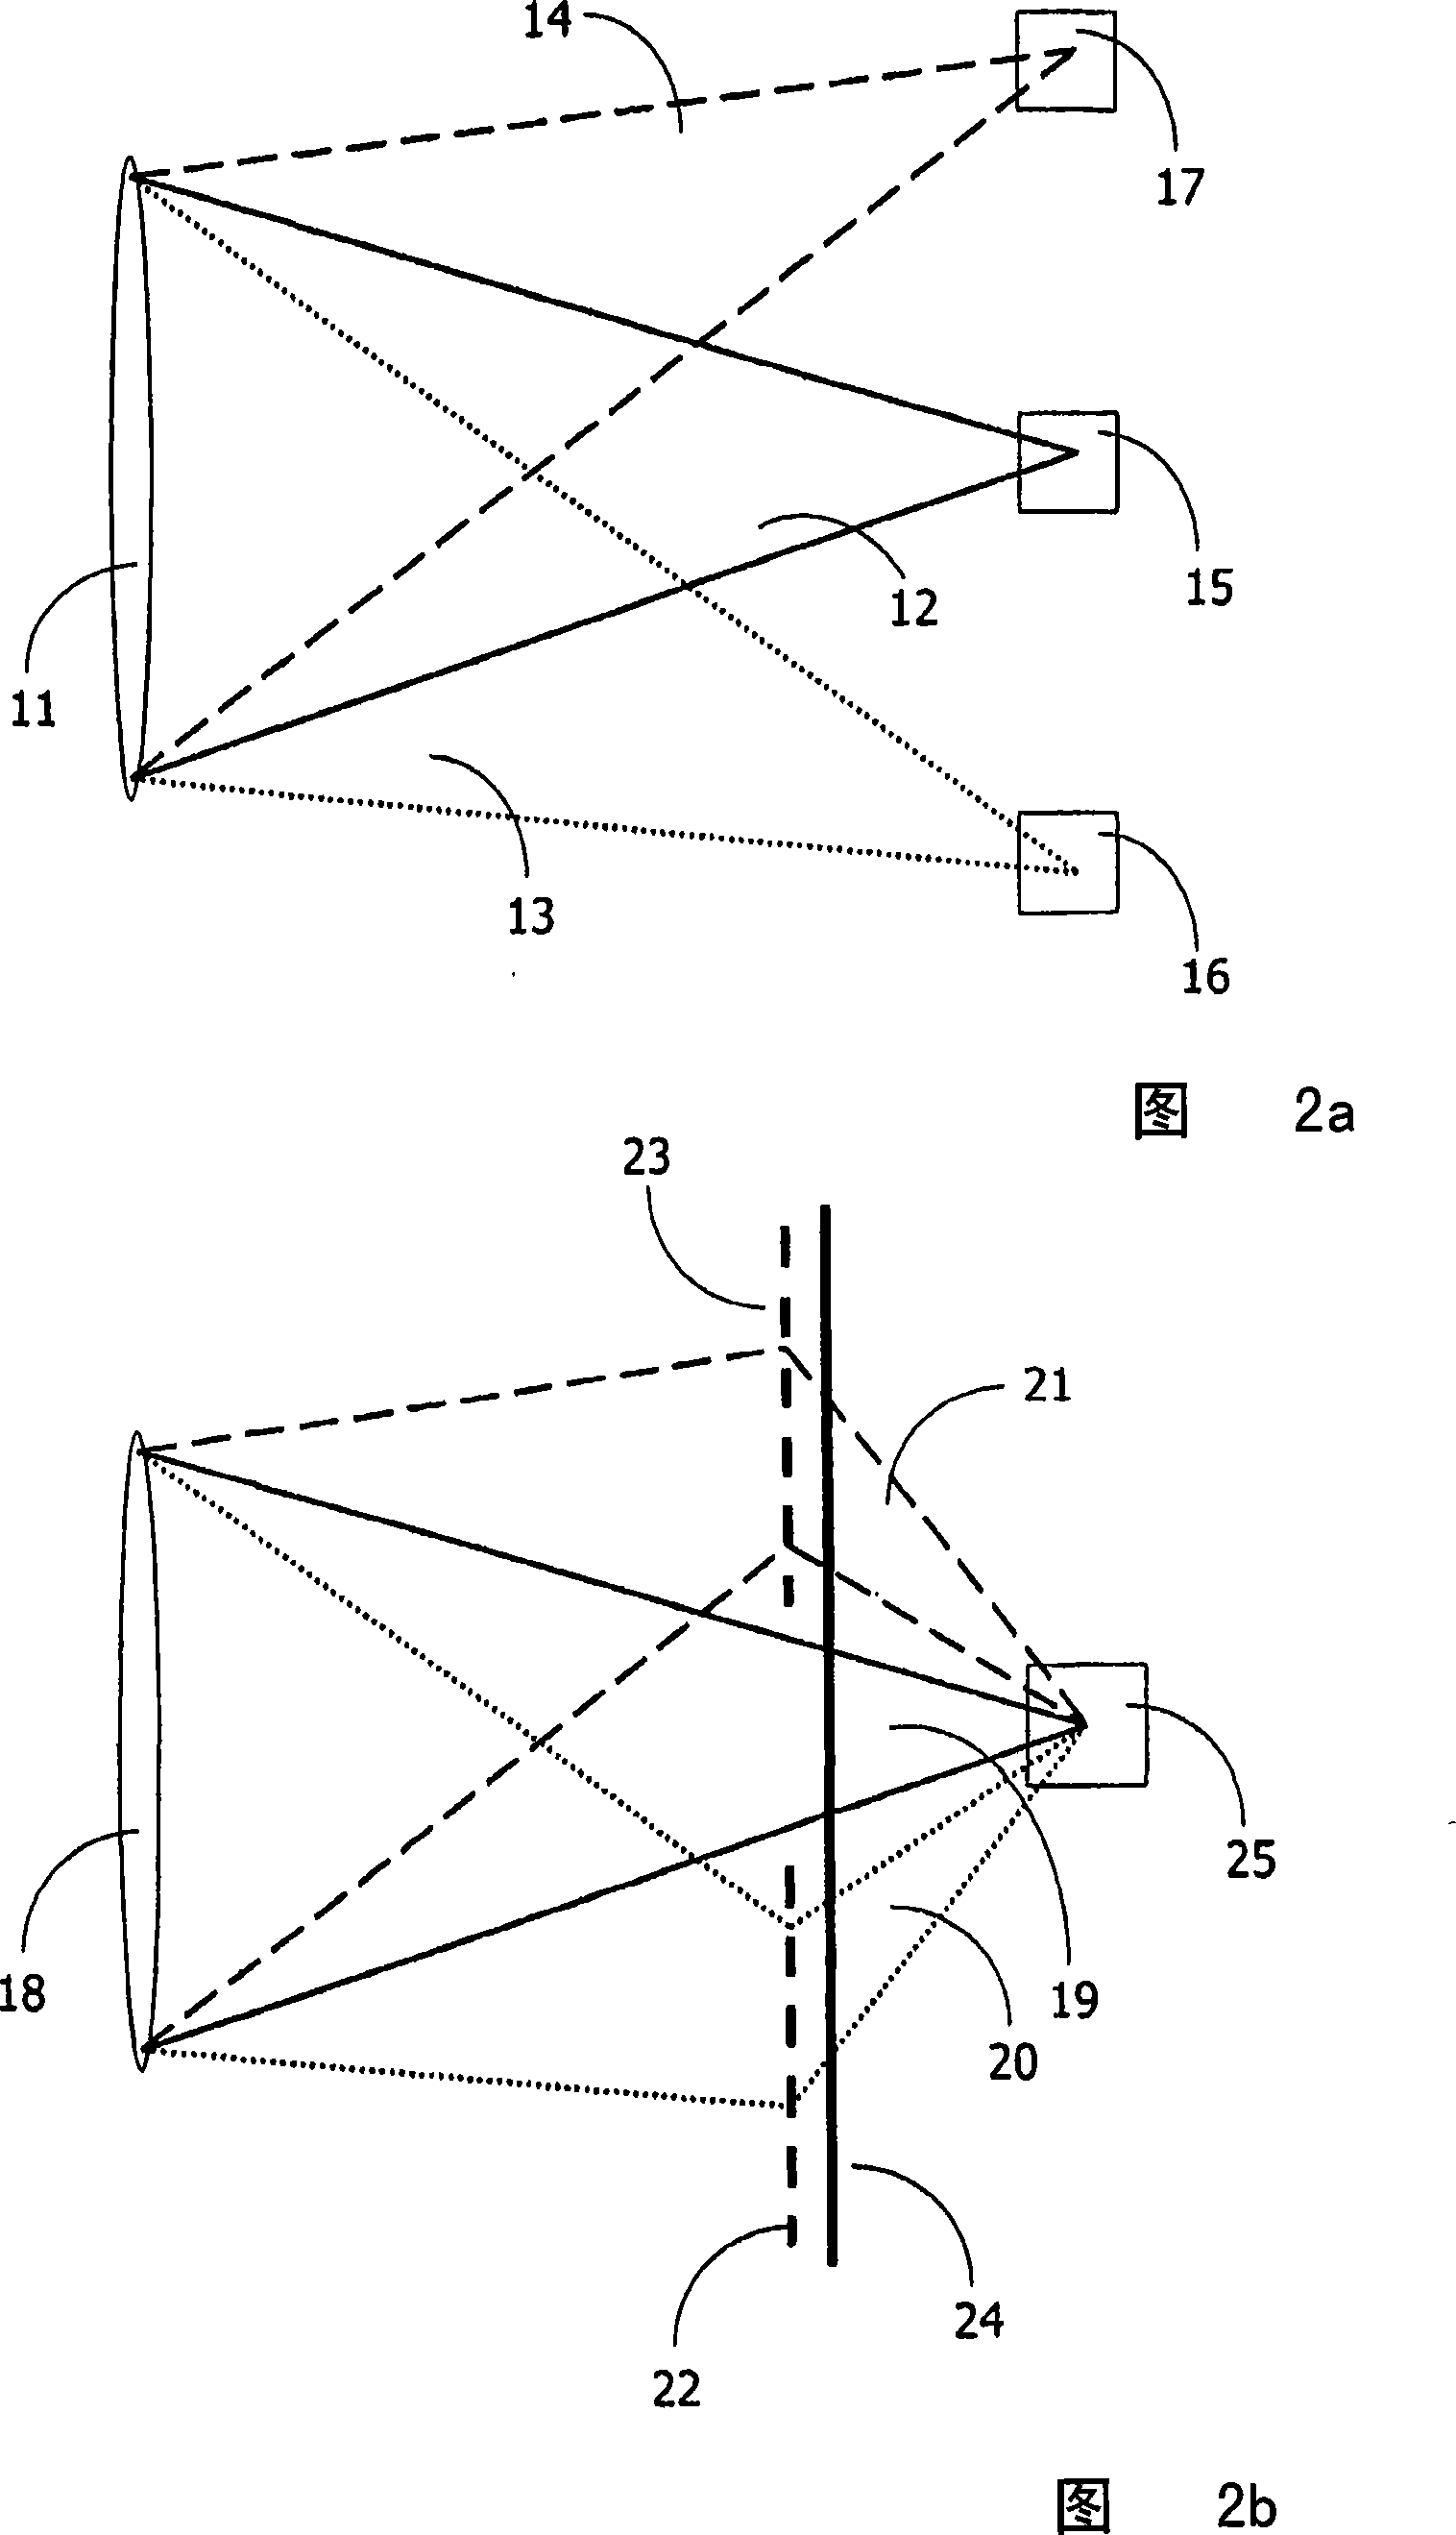 Servo branch of optical disc drive comprising a switchable diaphragm and a device for beam deflection, and methods for measuring beam landing and spherical aberration